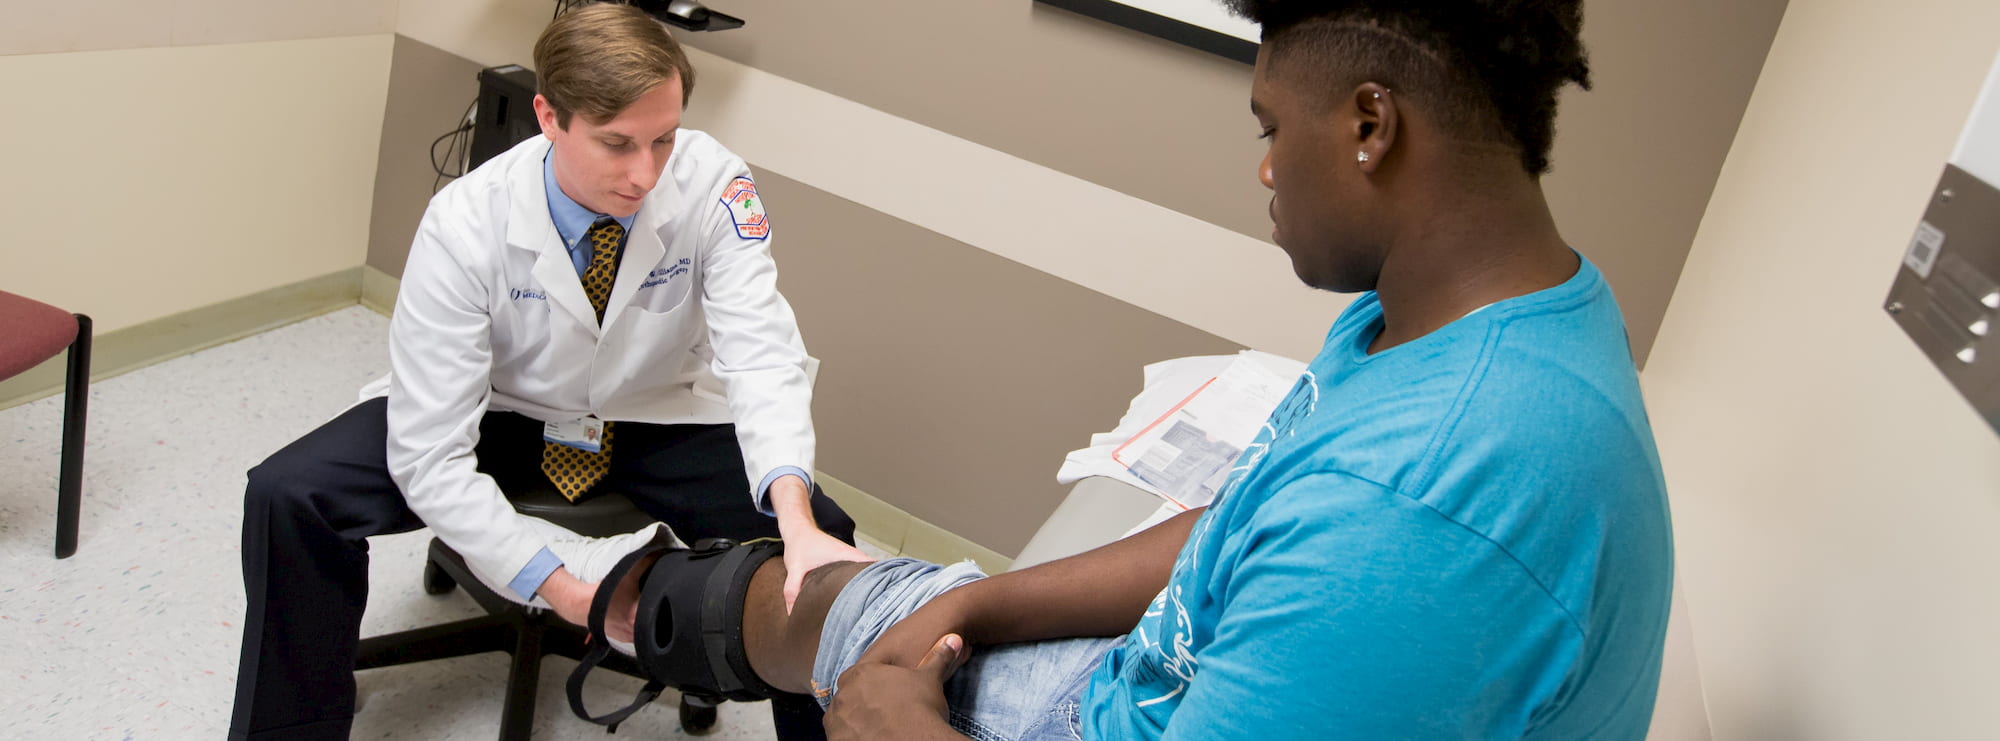 Orthopedic physician examines an injured knee in a brace.